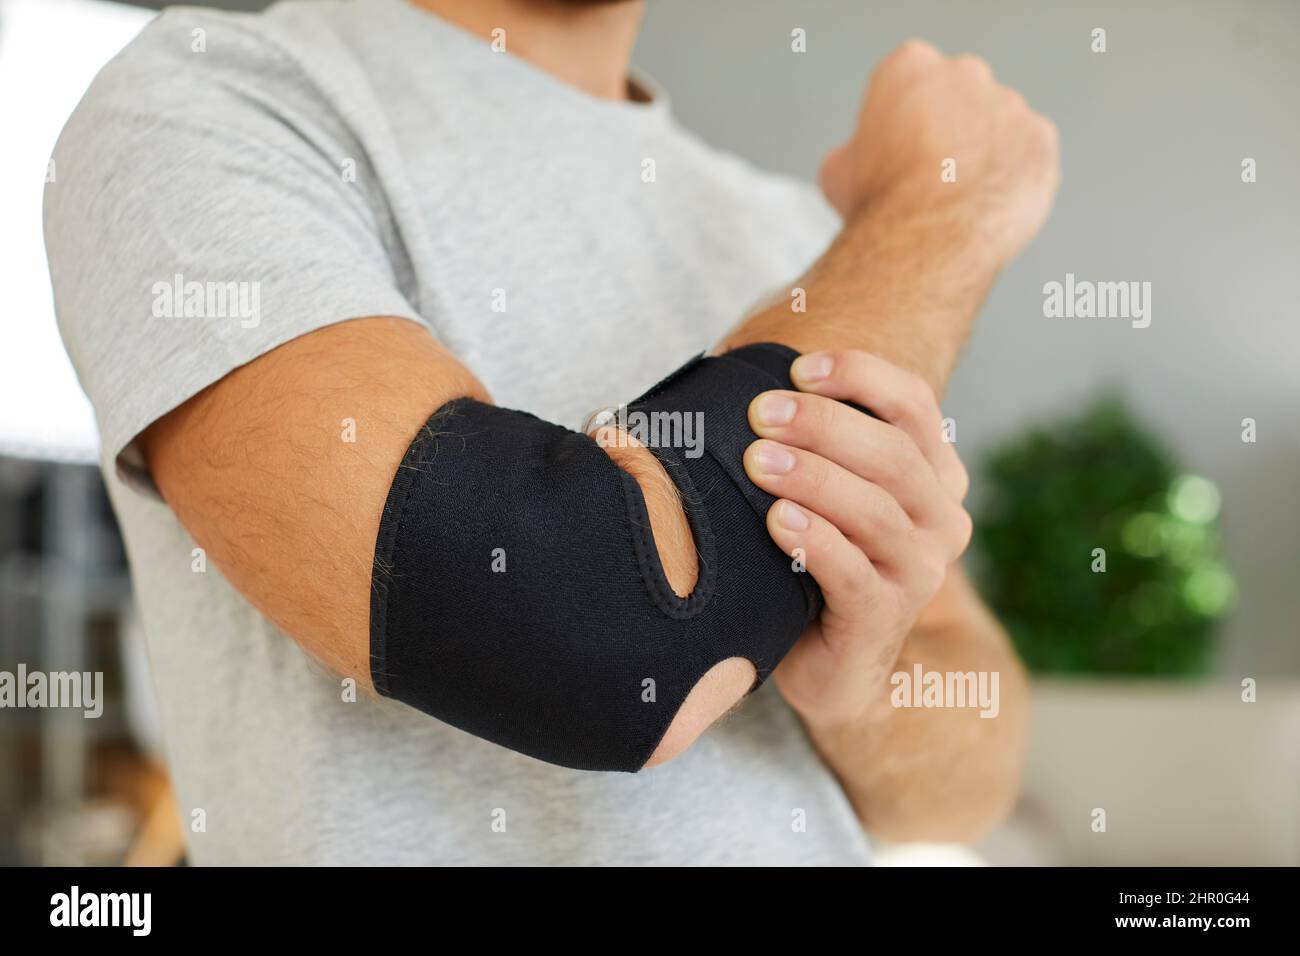 Black elastic supportive medical bandage on elbow of man who is recovering from injury. Stock Photo